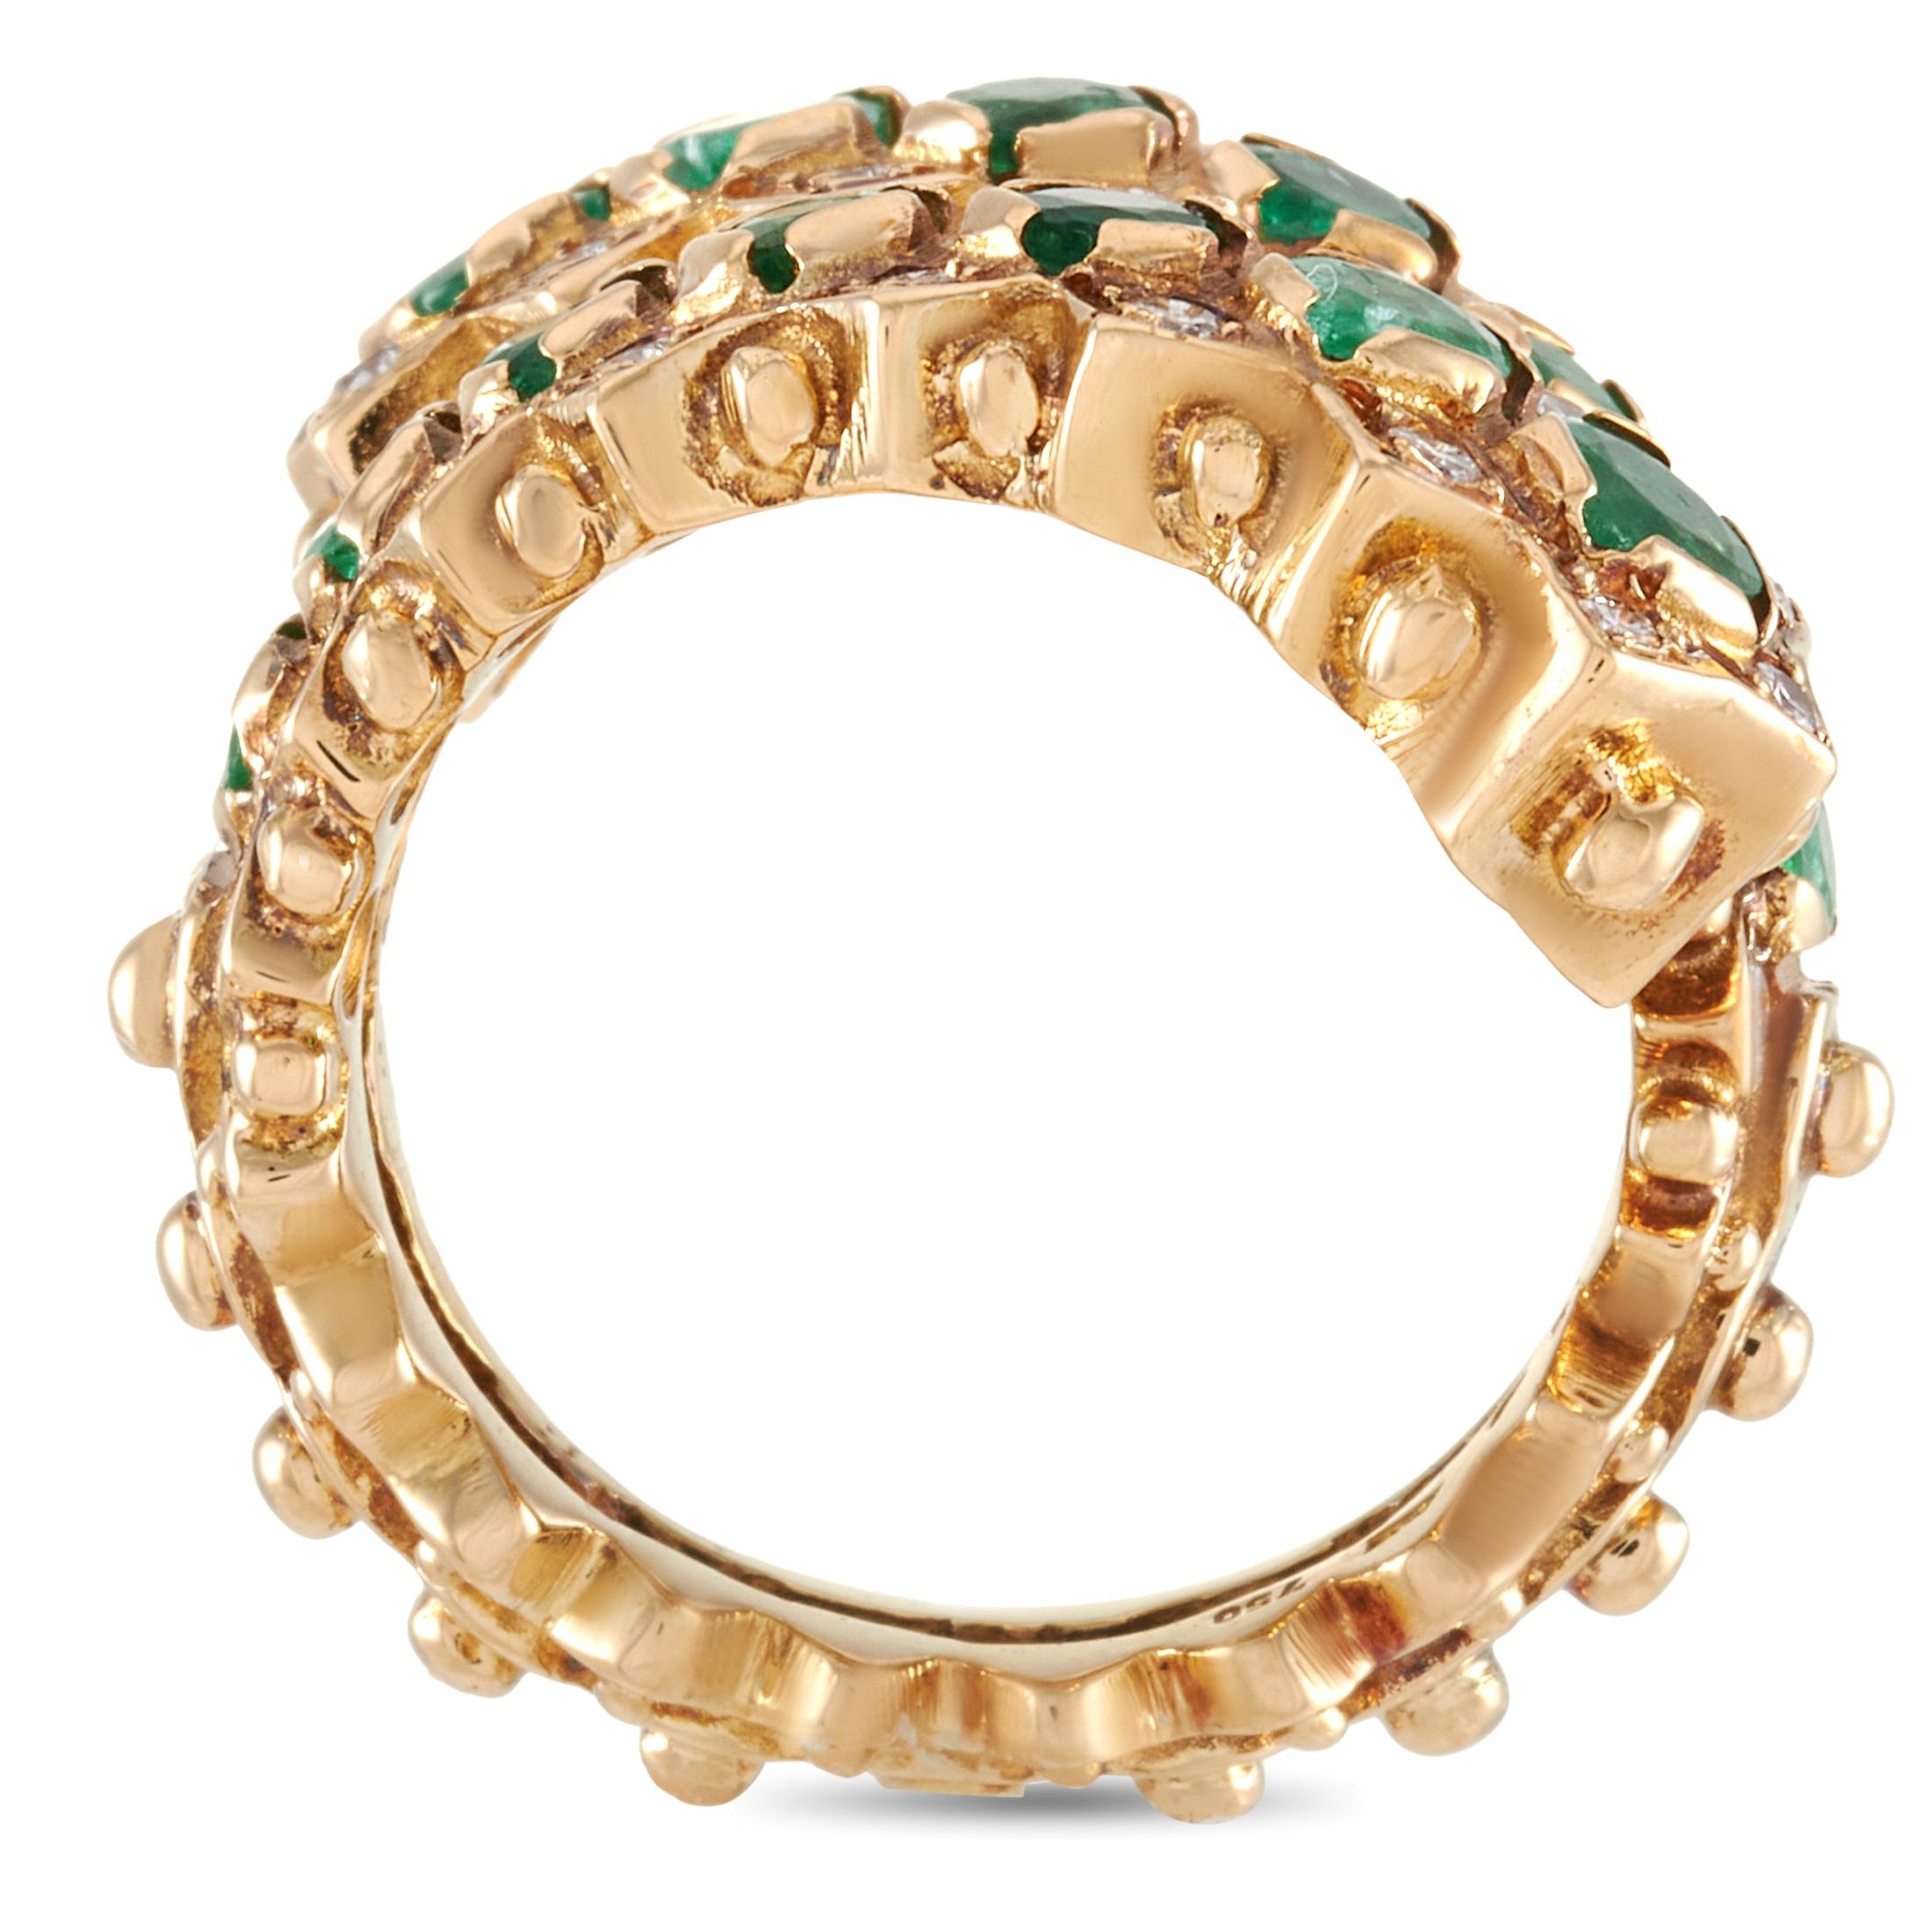 This Ilias Lalaounis ring is crafted from 18K yellow gold and set with emeralds and a total of 0.35 carats of diamonds. The ring weighs 17.9 grams. It boasts band thickness of 6 mm and top height of 4 mm, while top dimensions measure 16 by 20 mm.
